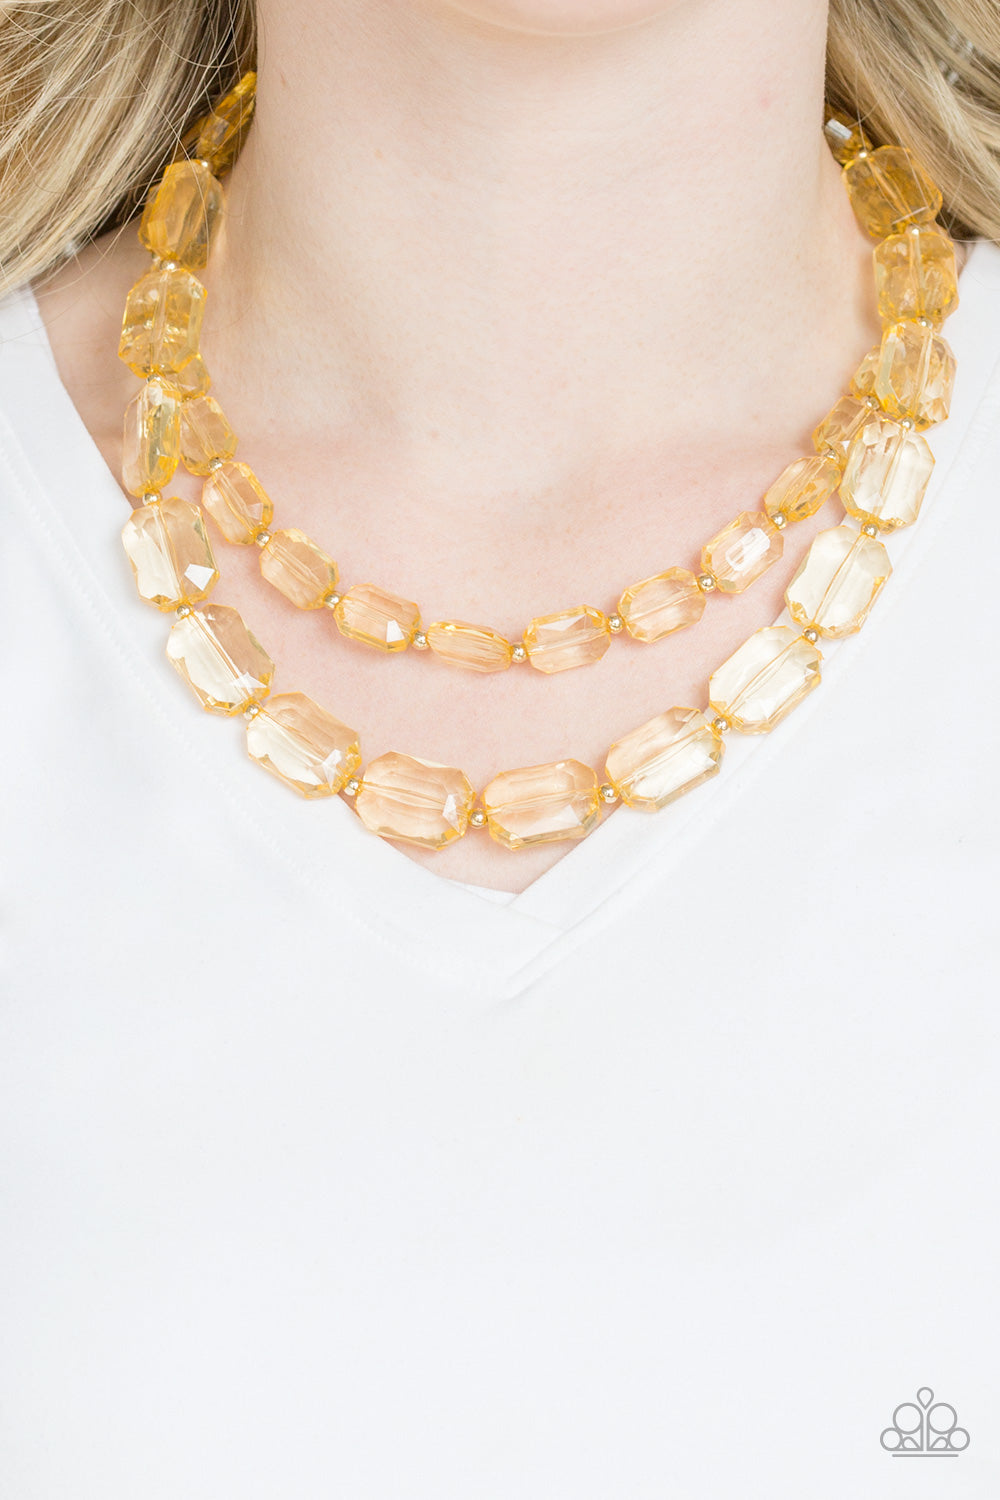 Paparazzi Accessories Ice Bank - Gold Necklaces - Lady T Accessories